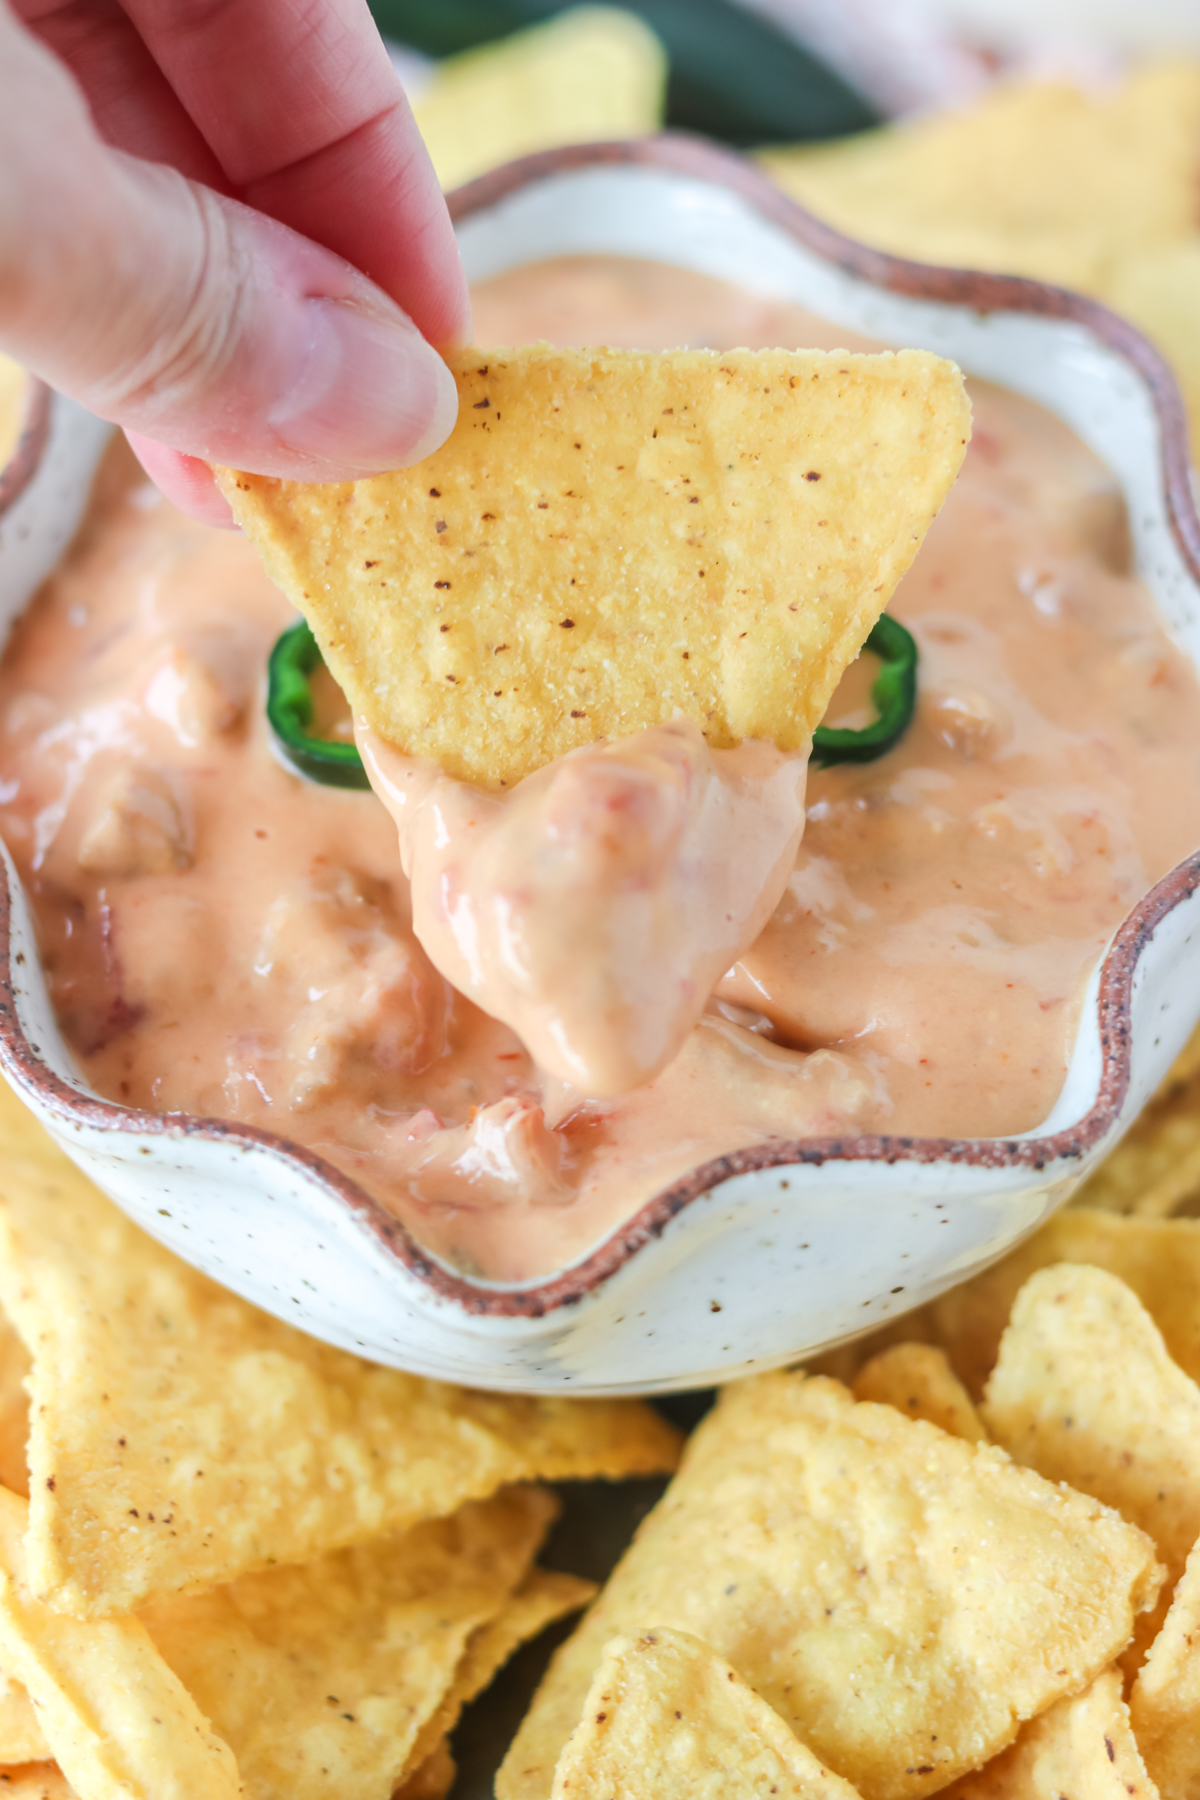 https://easyrecipesfromhome.com/wp-content/uploads/2012/09/Crocpot-Queso-PIN.jpg